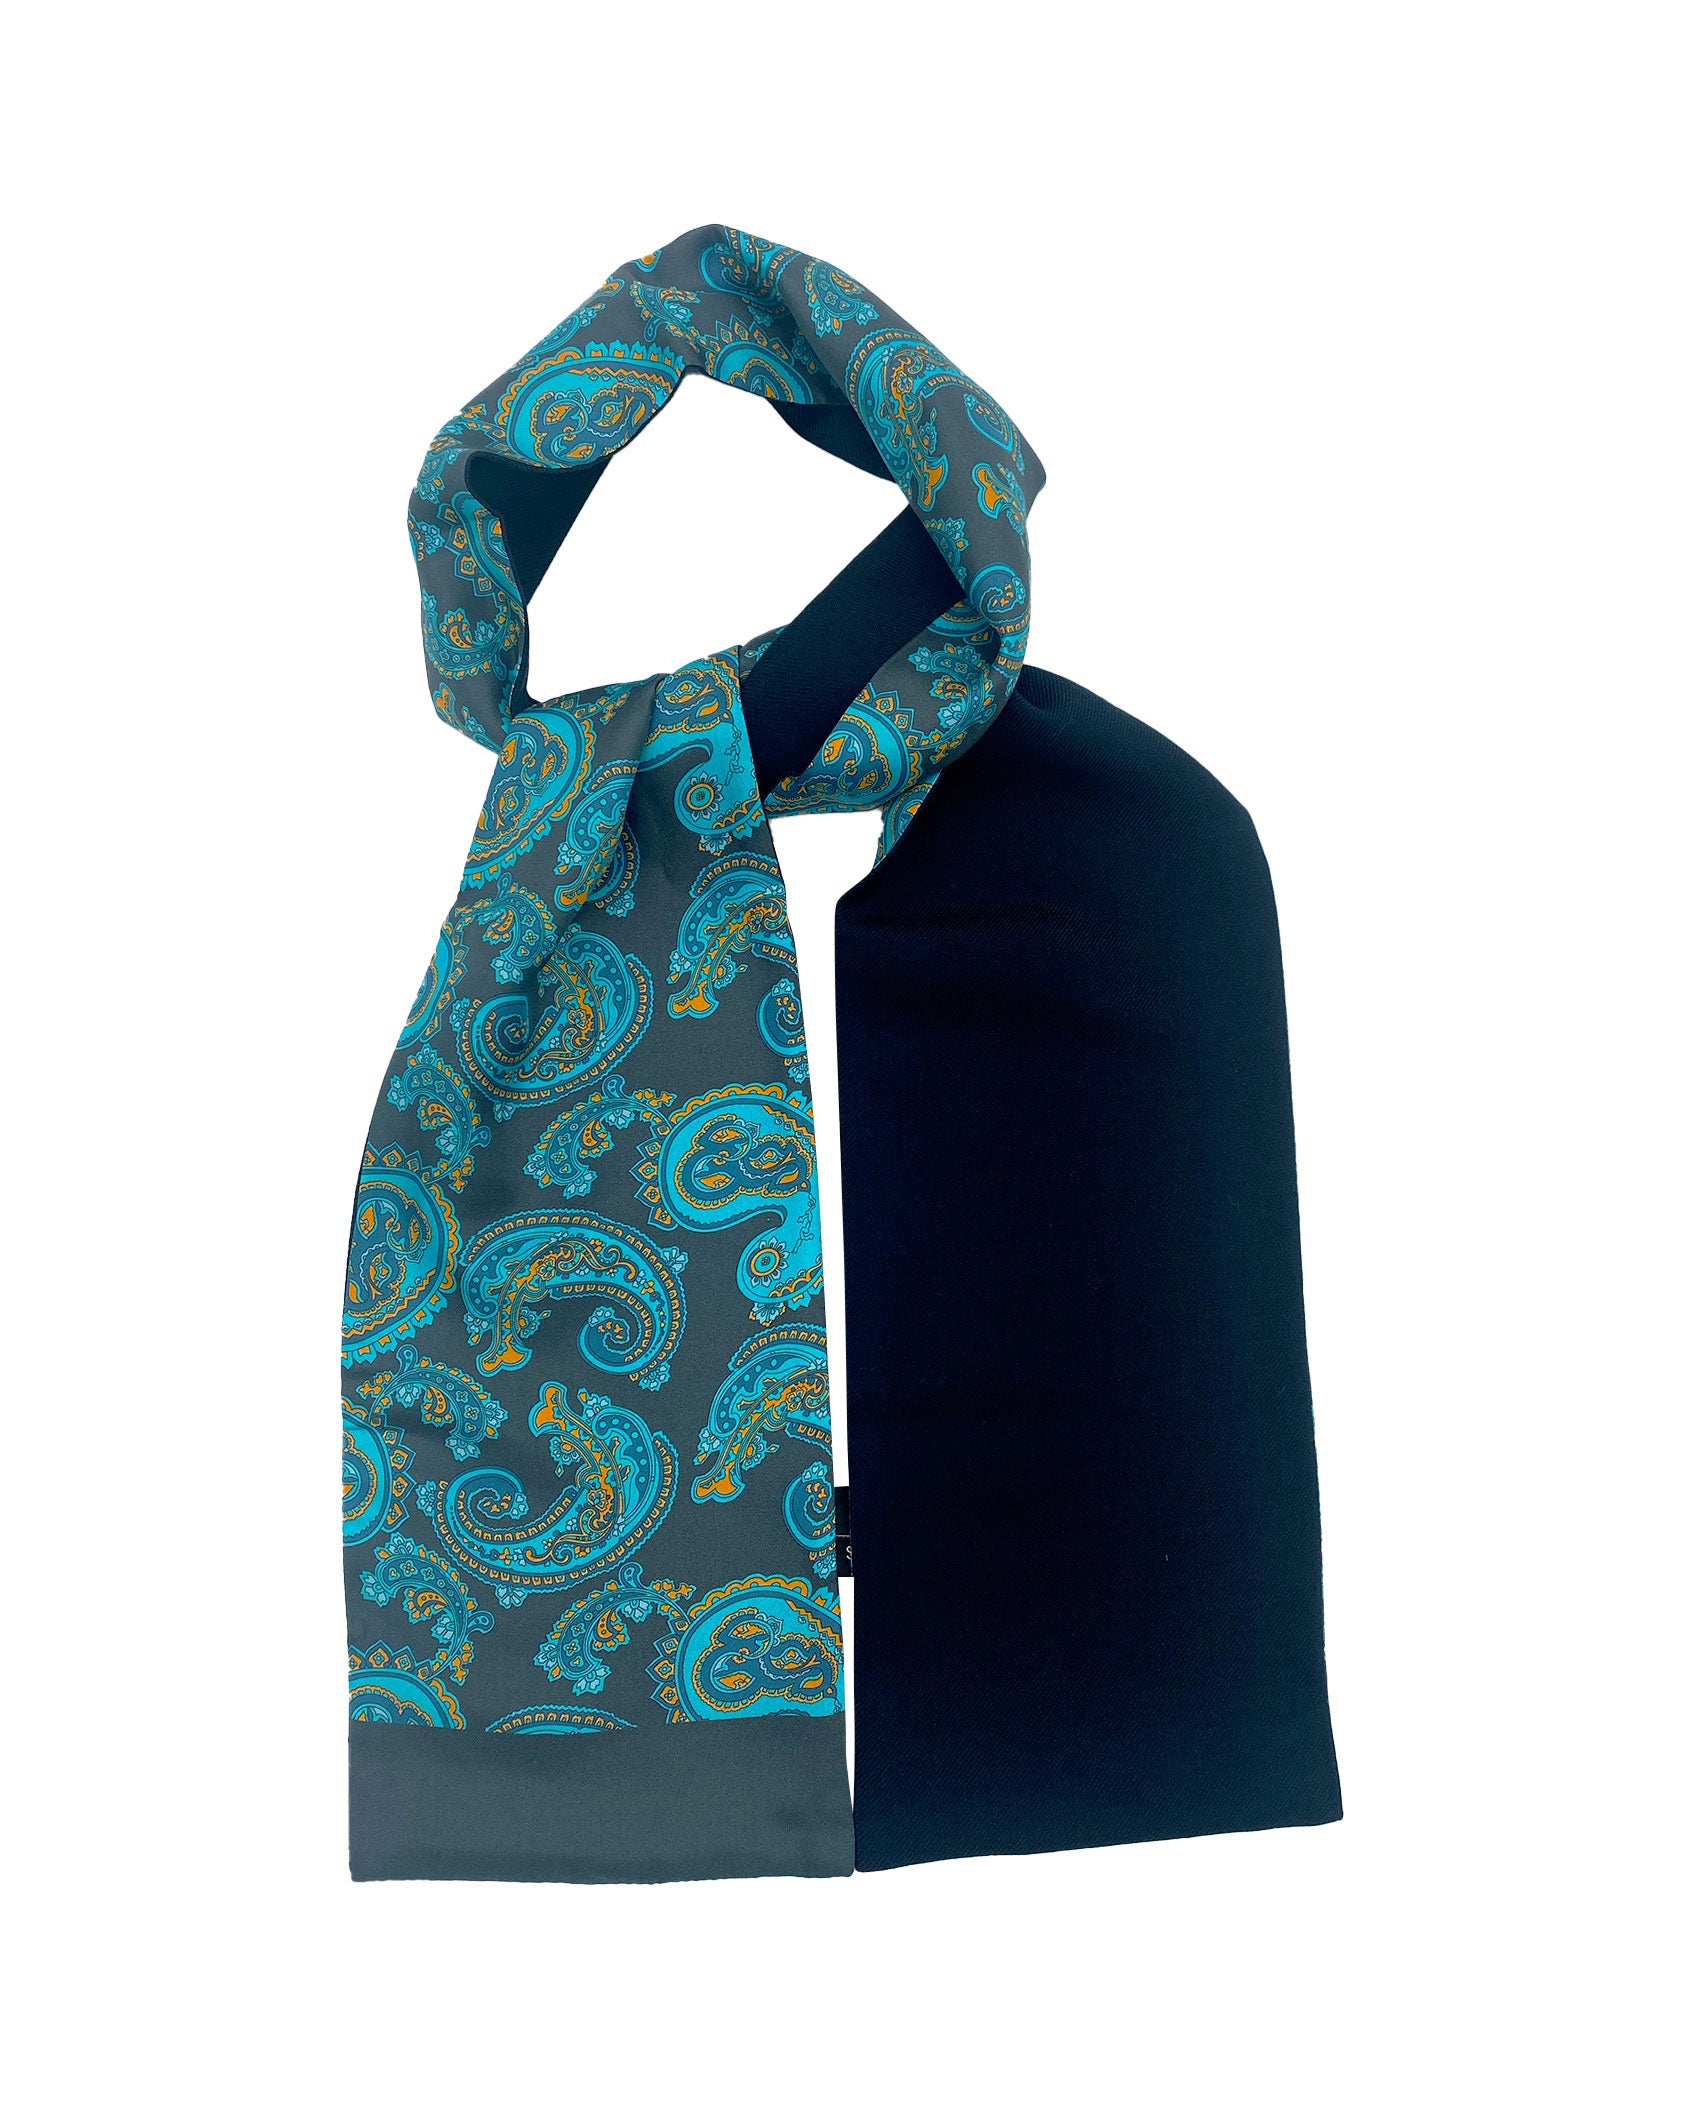 The Bridle wool-backed silk scarf looped and knotted, demonstrating the length, width, pattern on silk and the fine woollen underside.